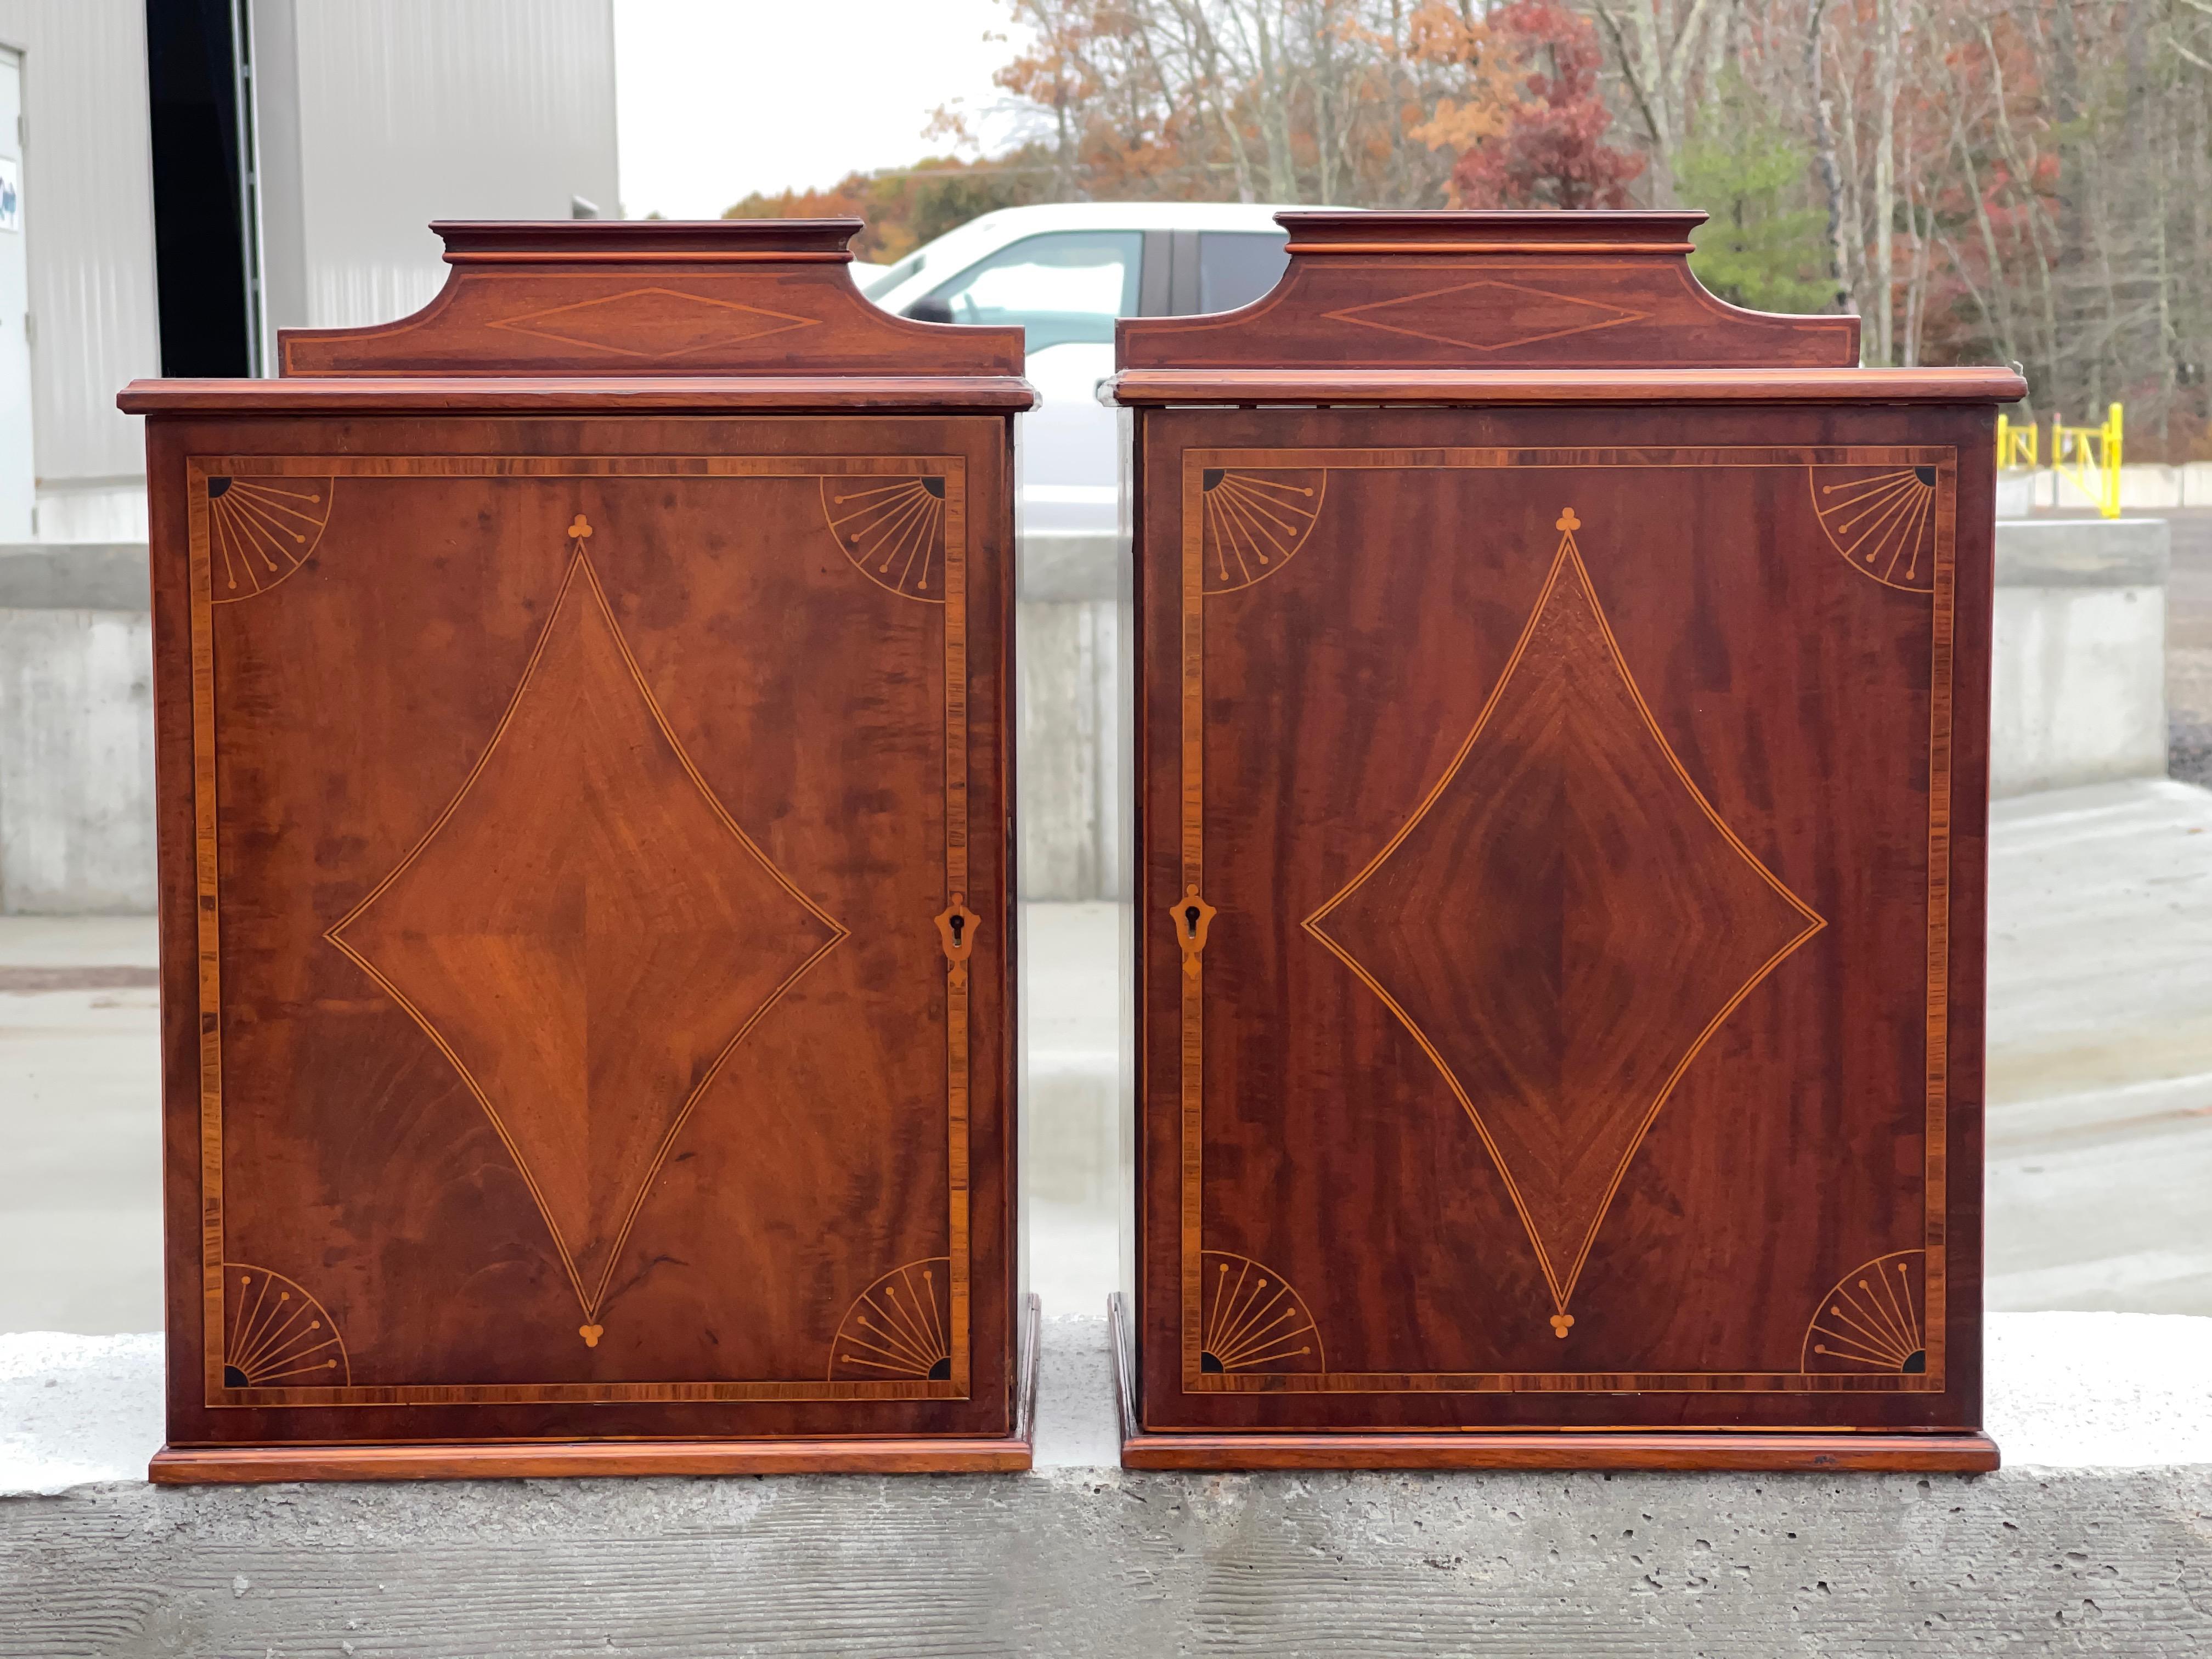 Pair of interesting and lovely single door walnut cabinets with satinwood decorative inlay, probably Edwardian made in the Sheraton taste.
Each has a single pull-out open drawer shelf.
Possibly bedside lockers or for tobacco.
Last image shows